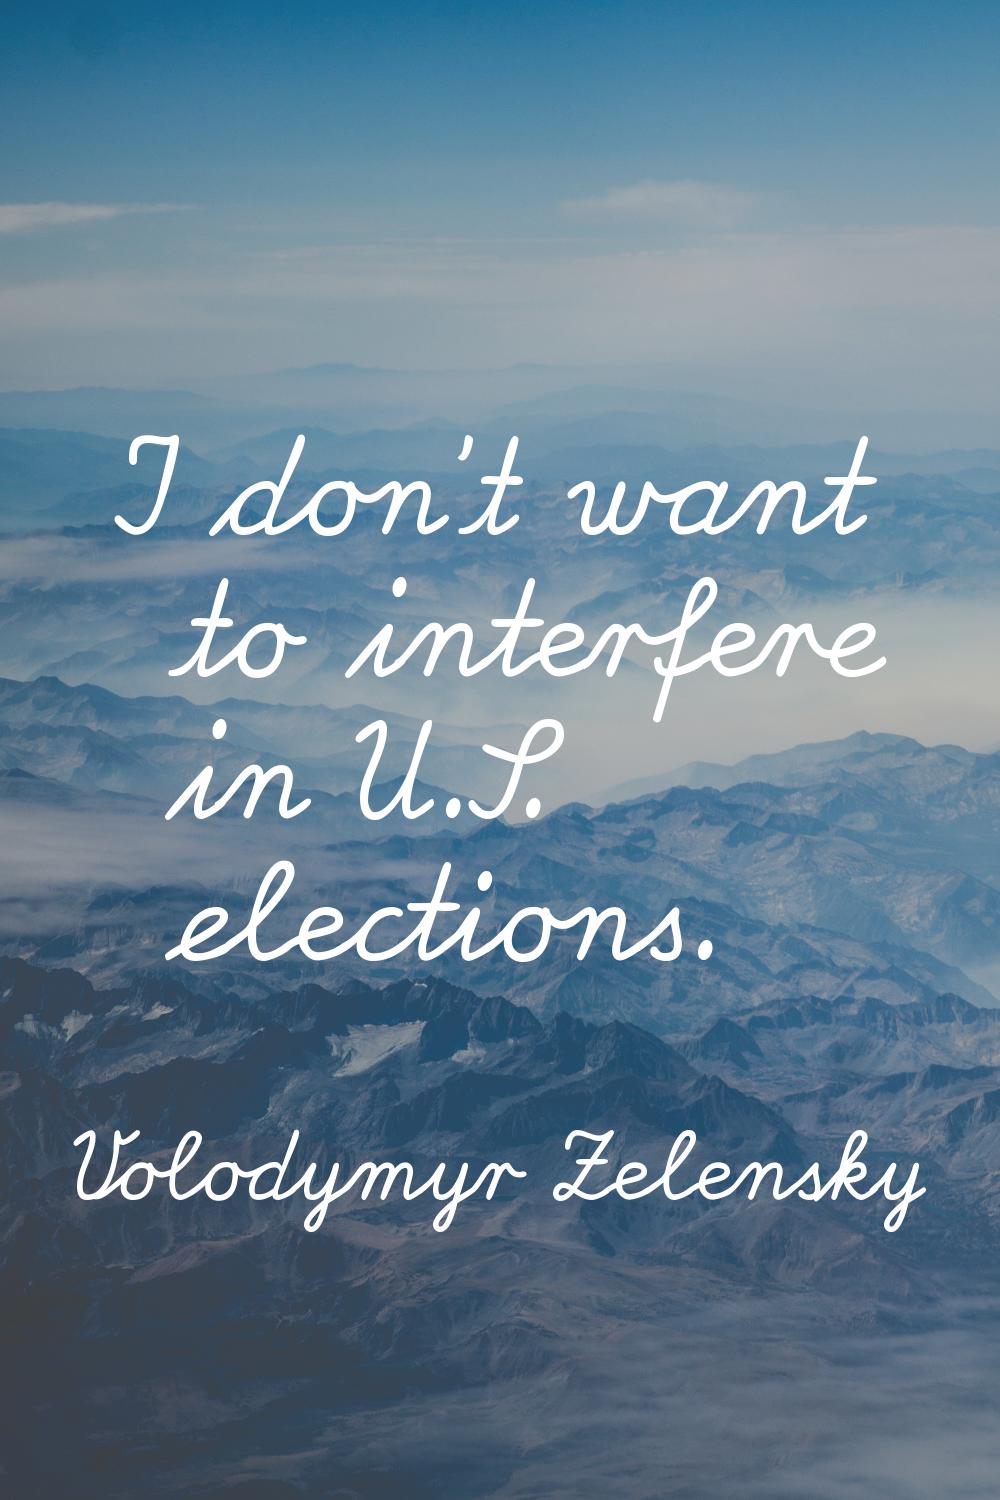 I don't want to interfere in U.S. elections.